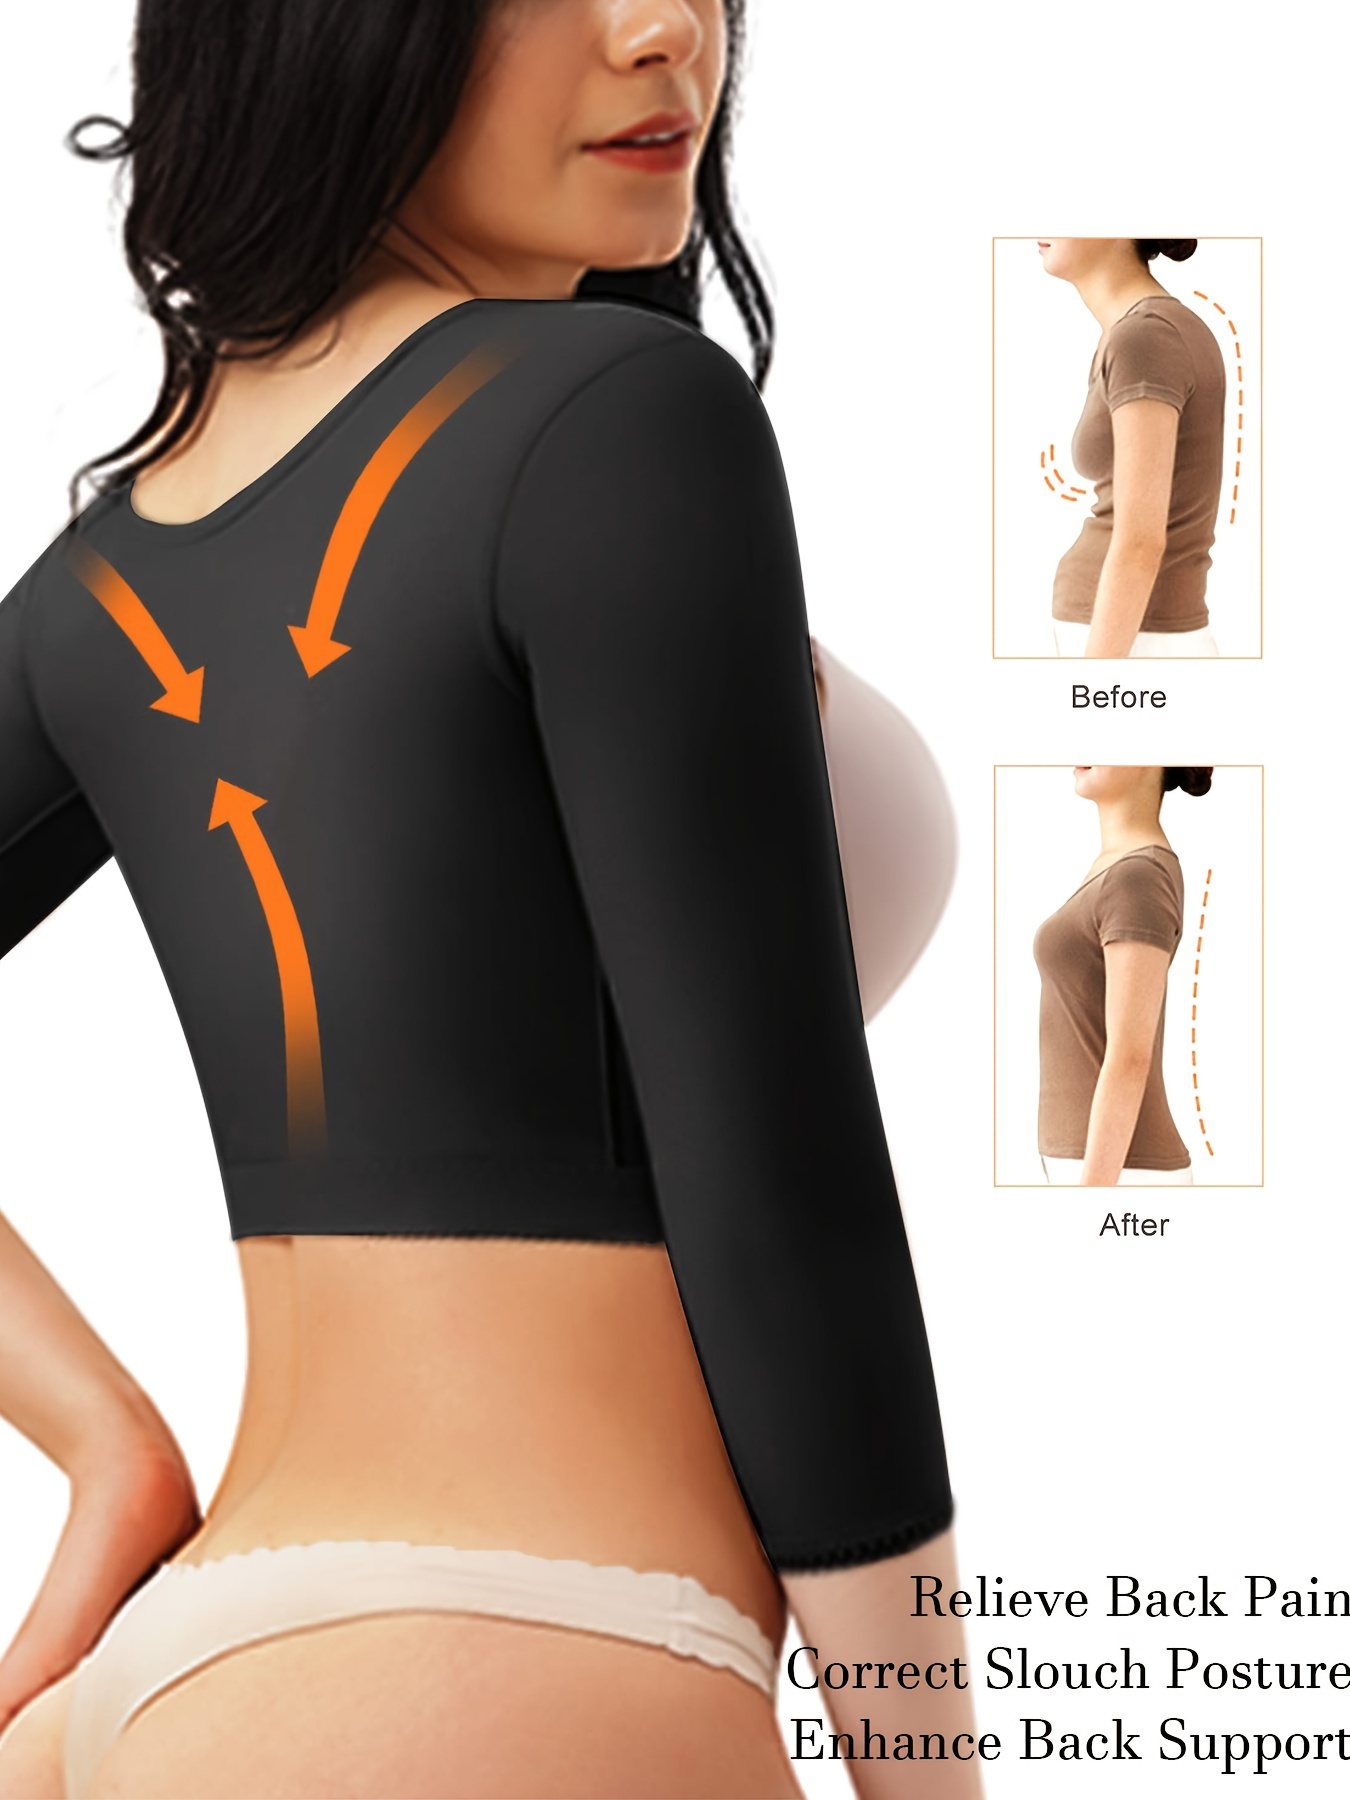 Upper Arm Shapers Compression Long Sleeves Women Arm Shapewear